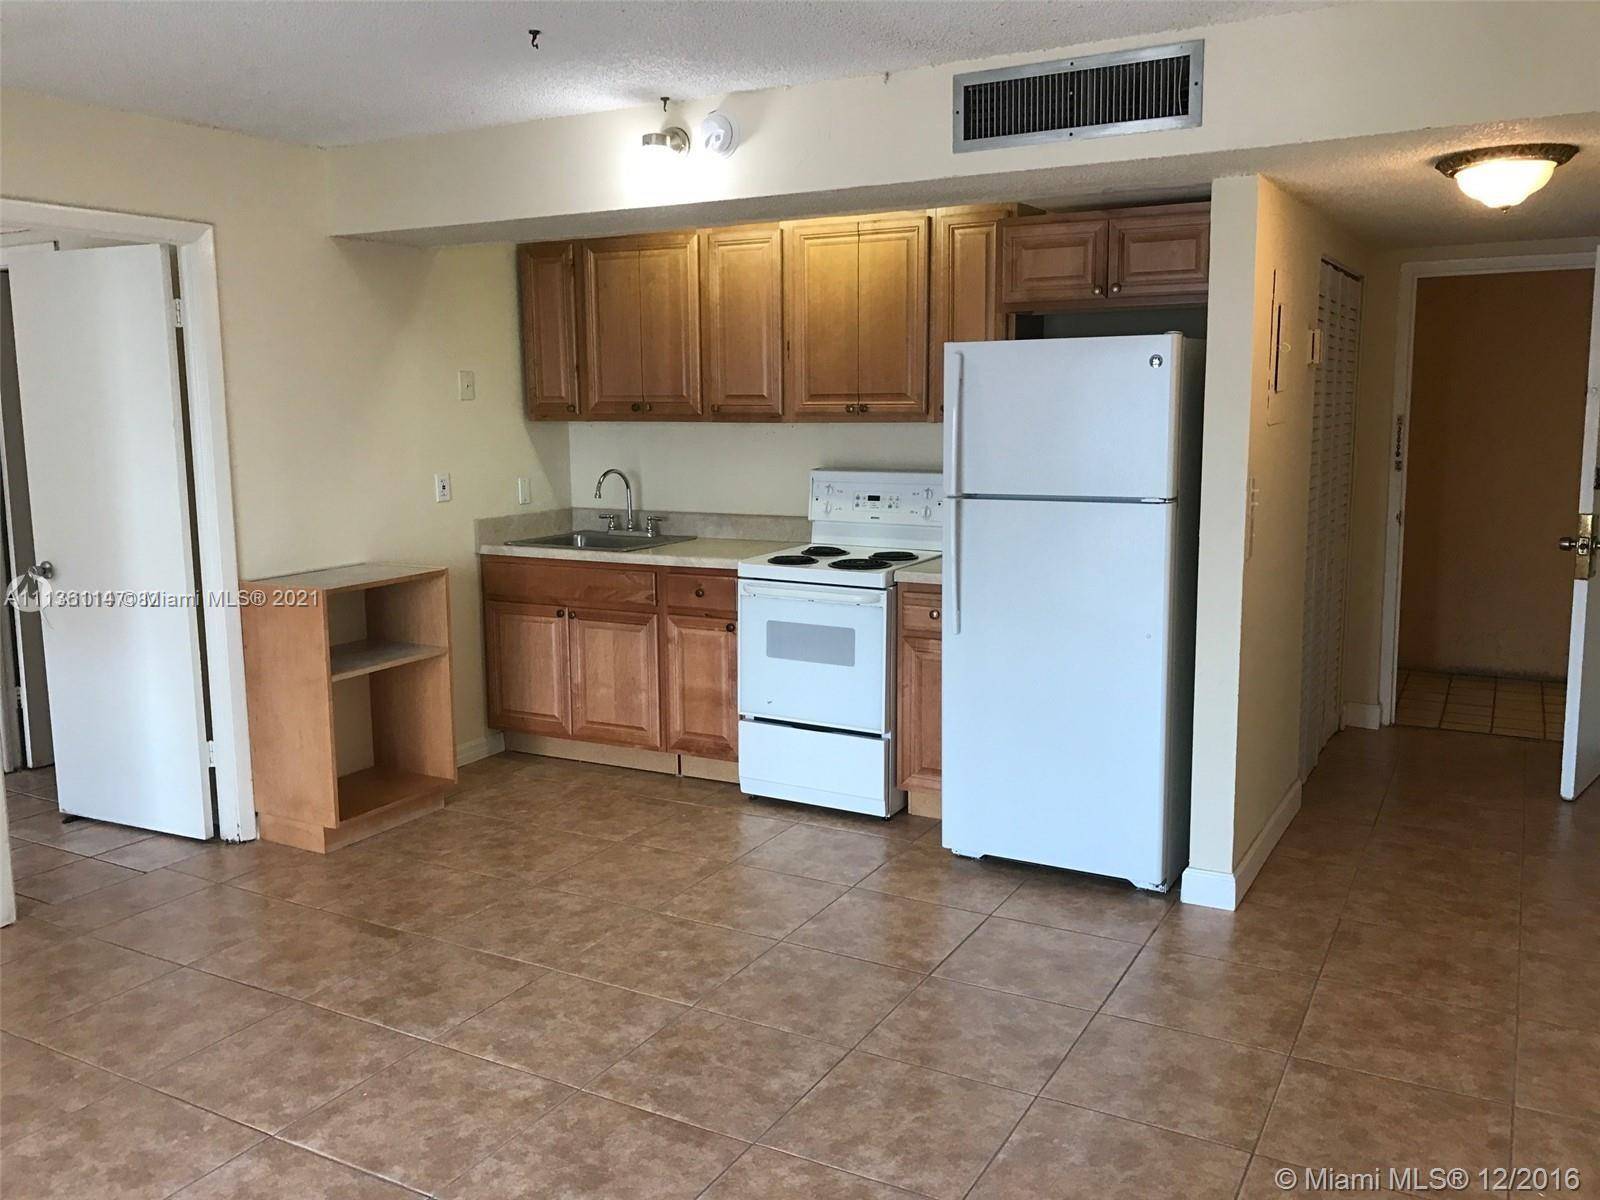 1 Bedroom 1 Bath, Tile Floors throughout, open kitchen and walk in closet, covered gated parking Swimming pool.